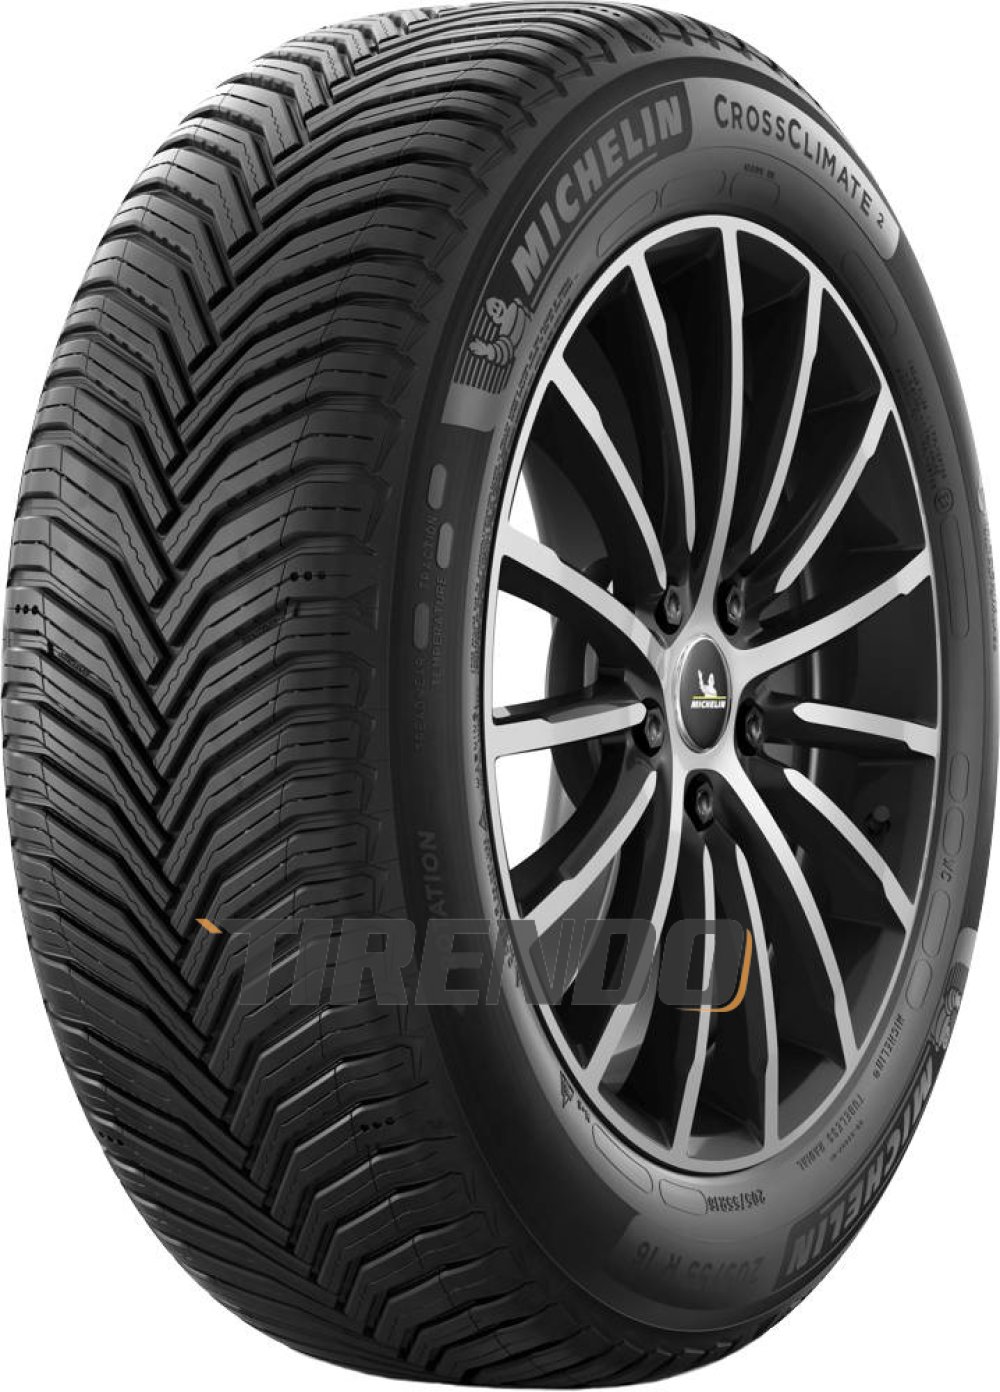 Image of Michelin CrossClimate 2 ( 245/45 R19 102V XL Acoustic, POL )